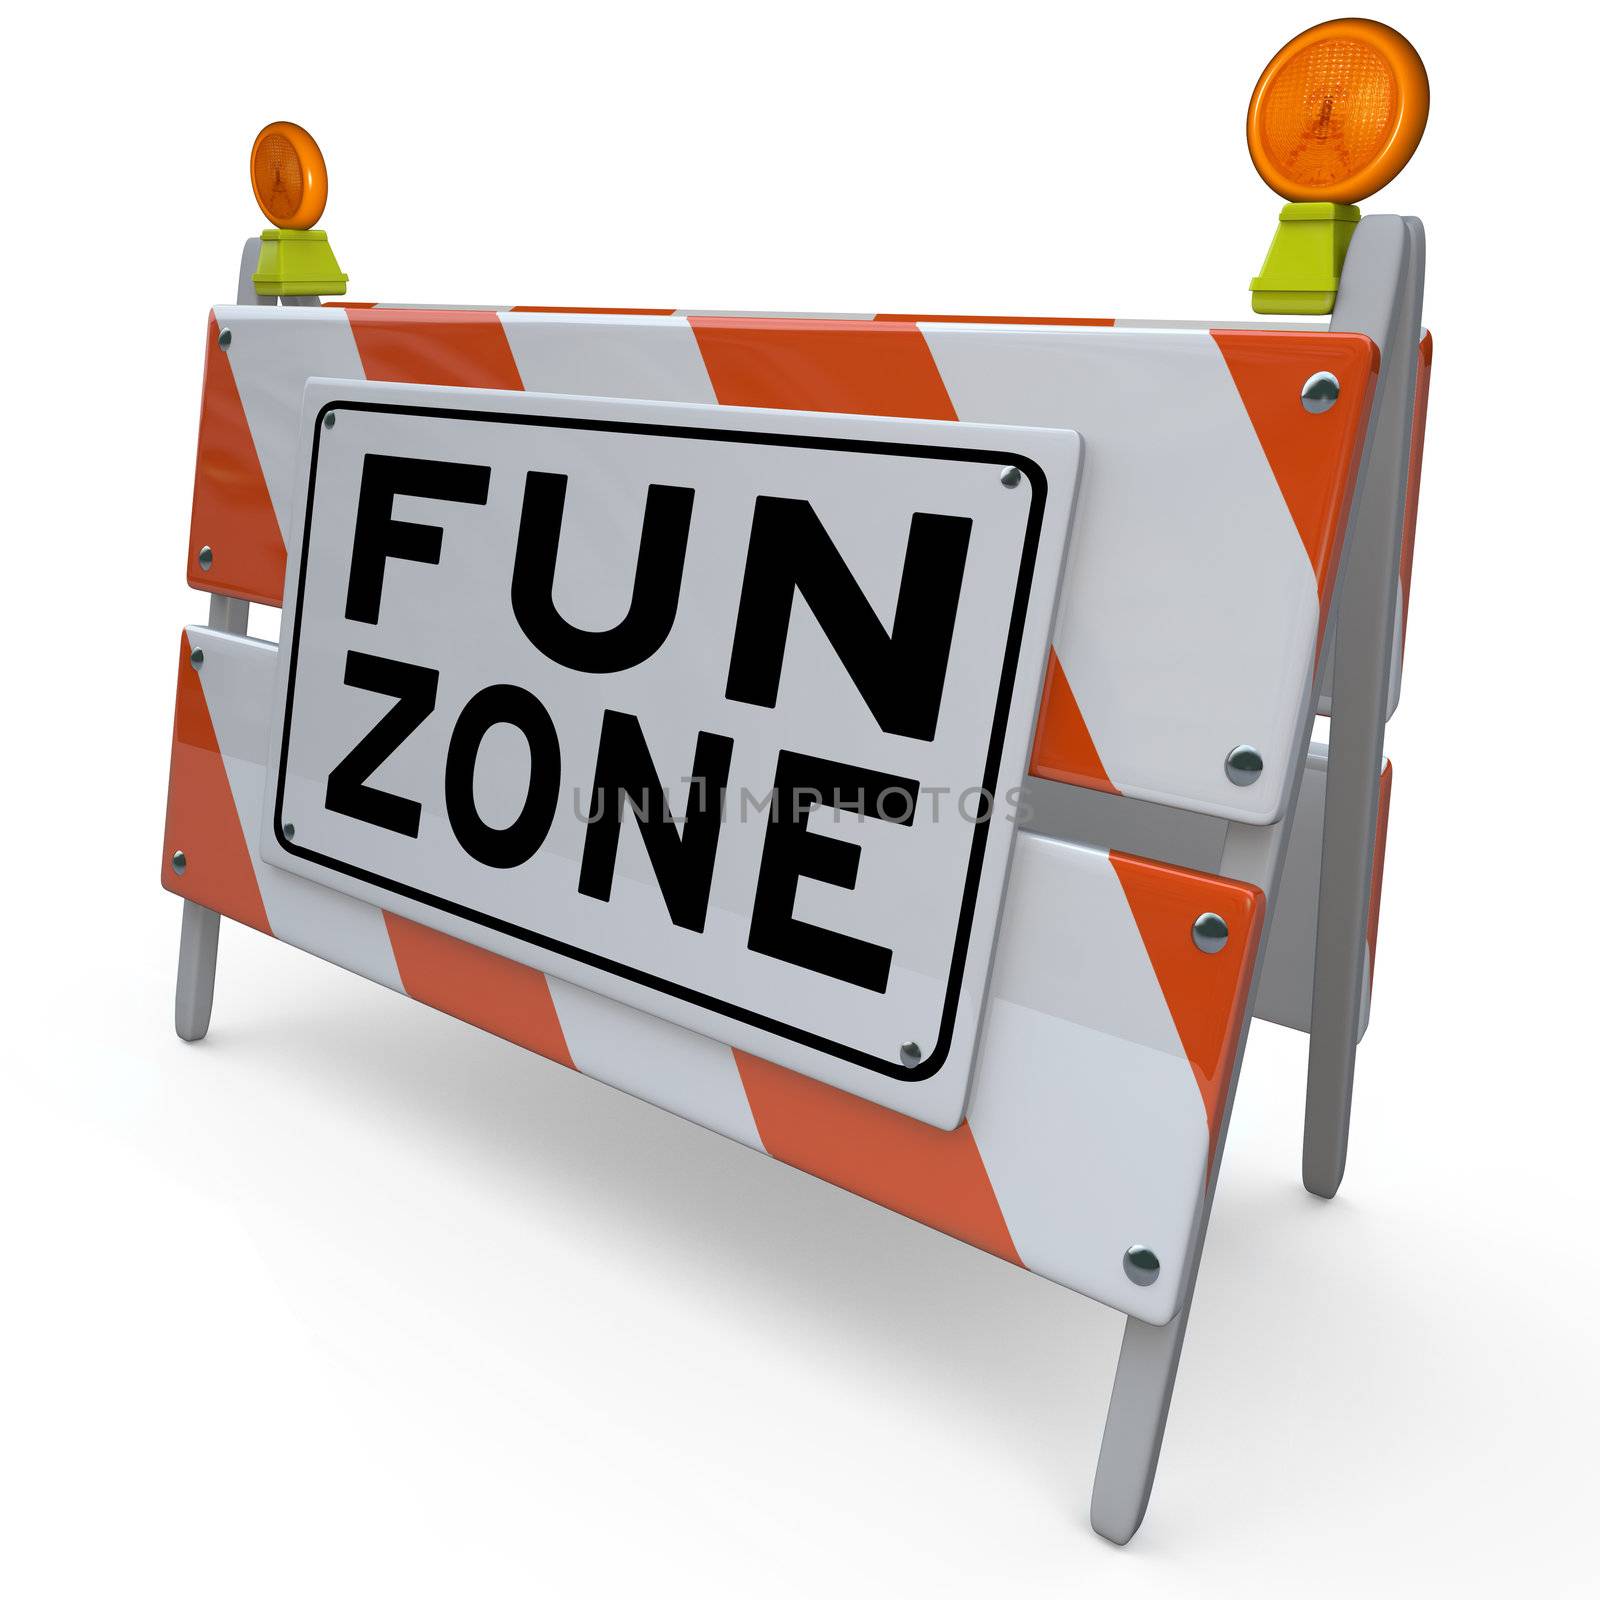 An orange and white construction barricade sign reading Fun Zone to indicate an area set aside for playing, entertainment, games and other activities for 